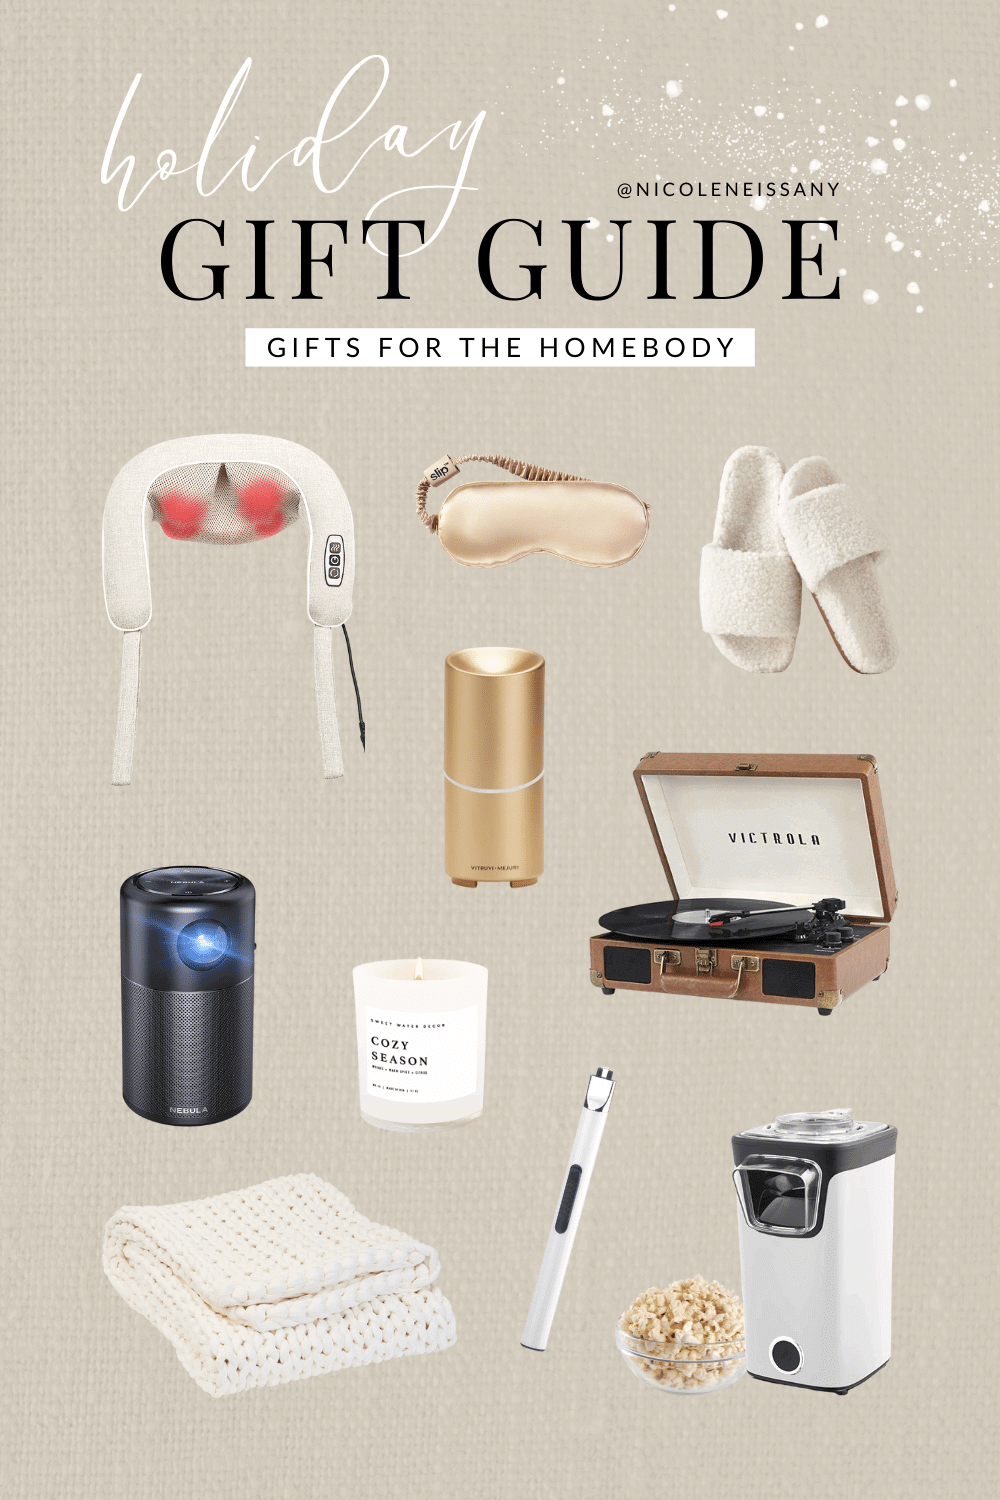 The Best Gift Ideas for Him - 2022 Holiday Gift Guide - Blogger Gift Guide